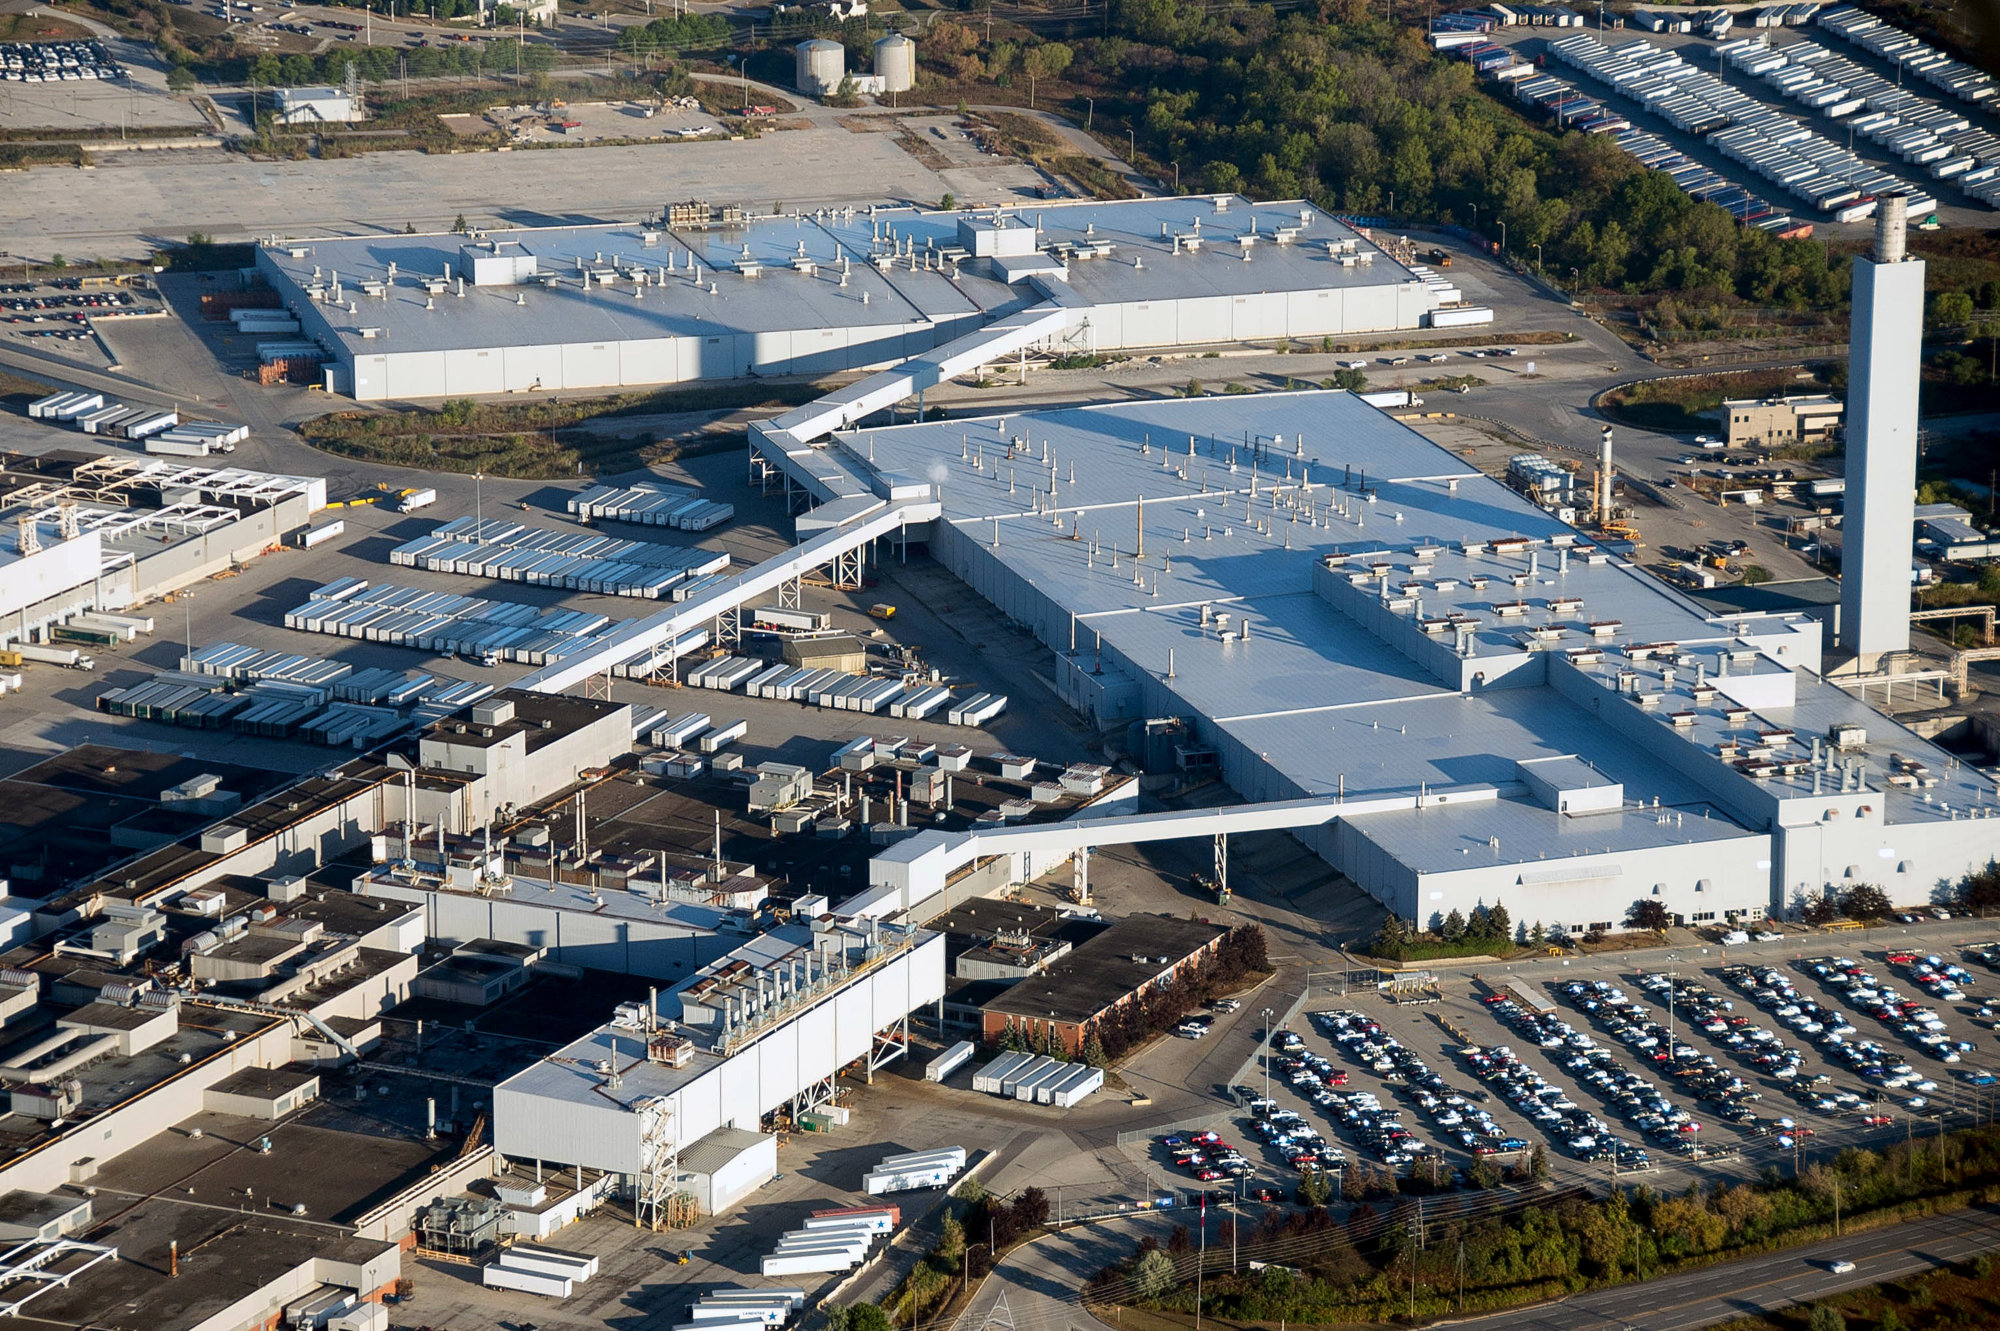 Vehicles sit at the Ford Motor Co. plant in this aerial photograph taken above Oakville, Ontario, Canada